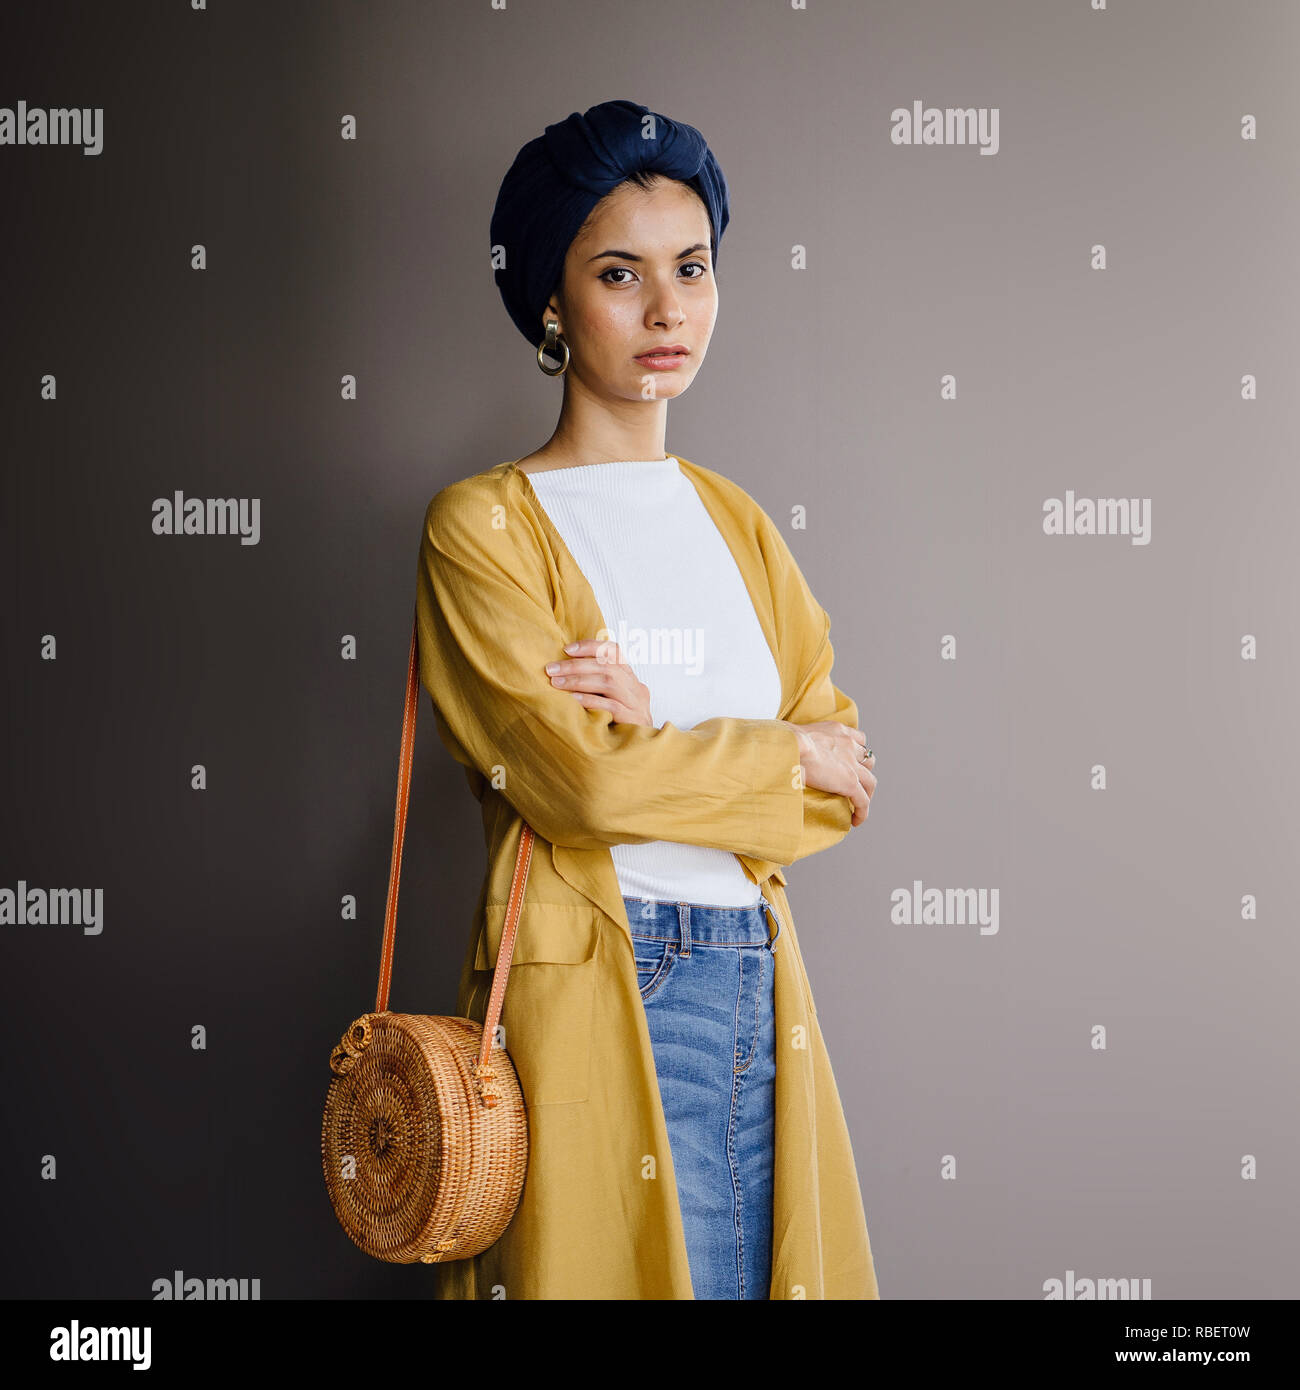 Studio portrait of a young, elegant and beautiful Middle Eastern woman in a turban hijab headscarf and stylish pastel-themed clothing. Stock Photo